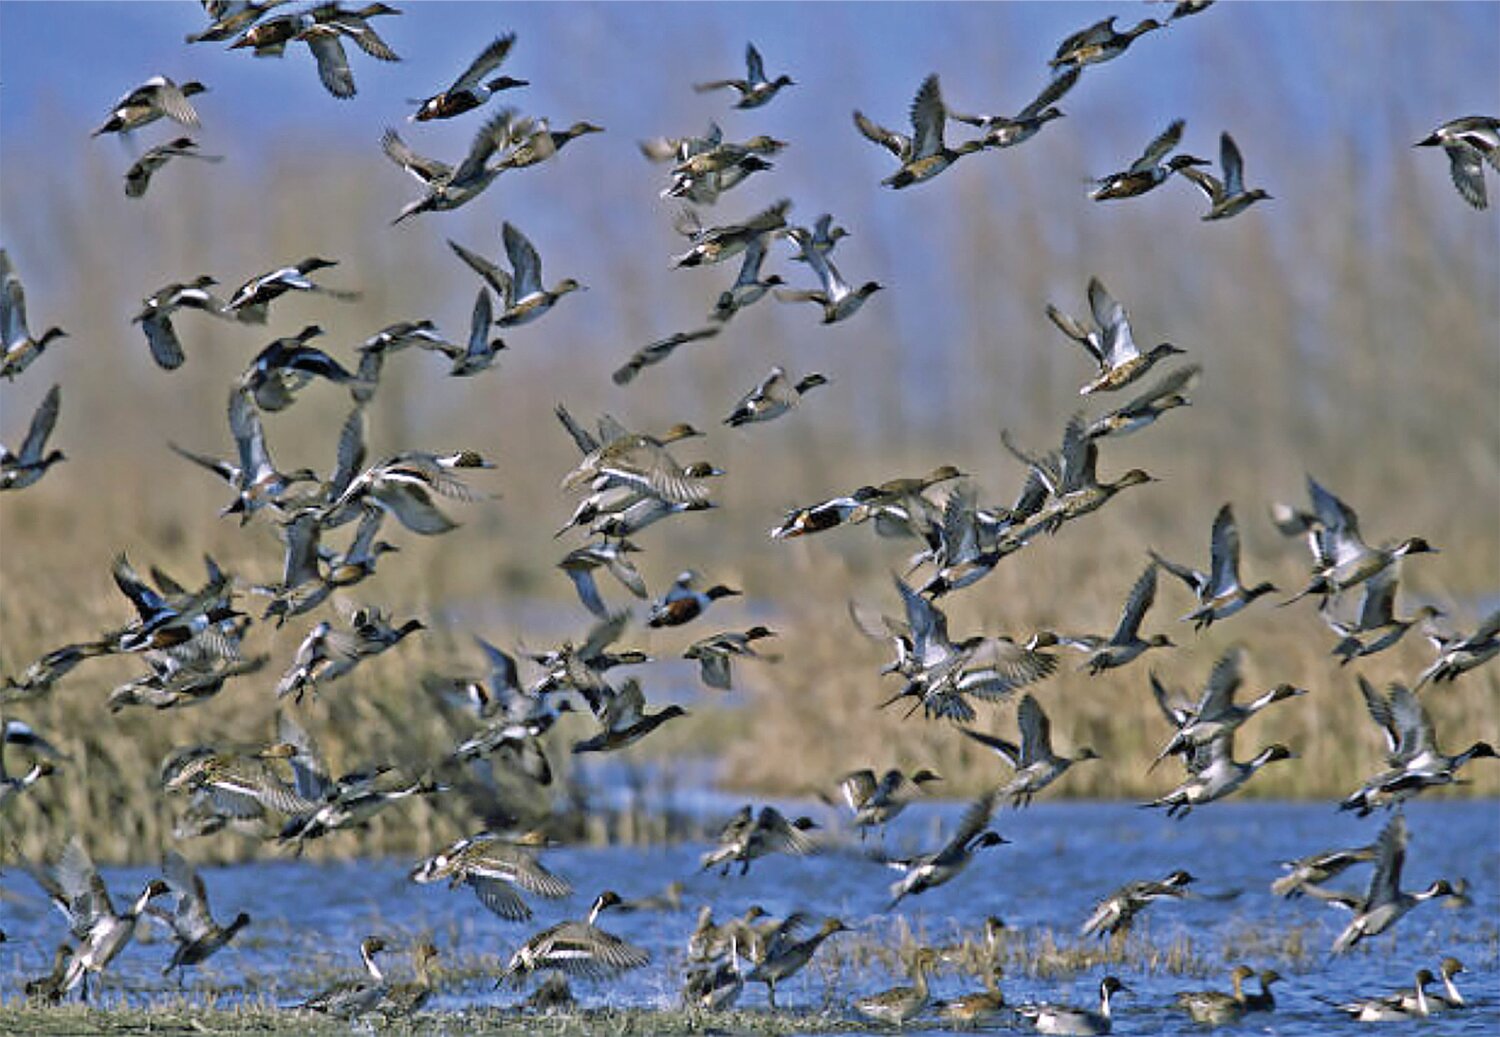 North Texas is on the Central Flyway for migratory waterfowl.